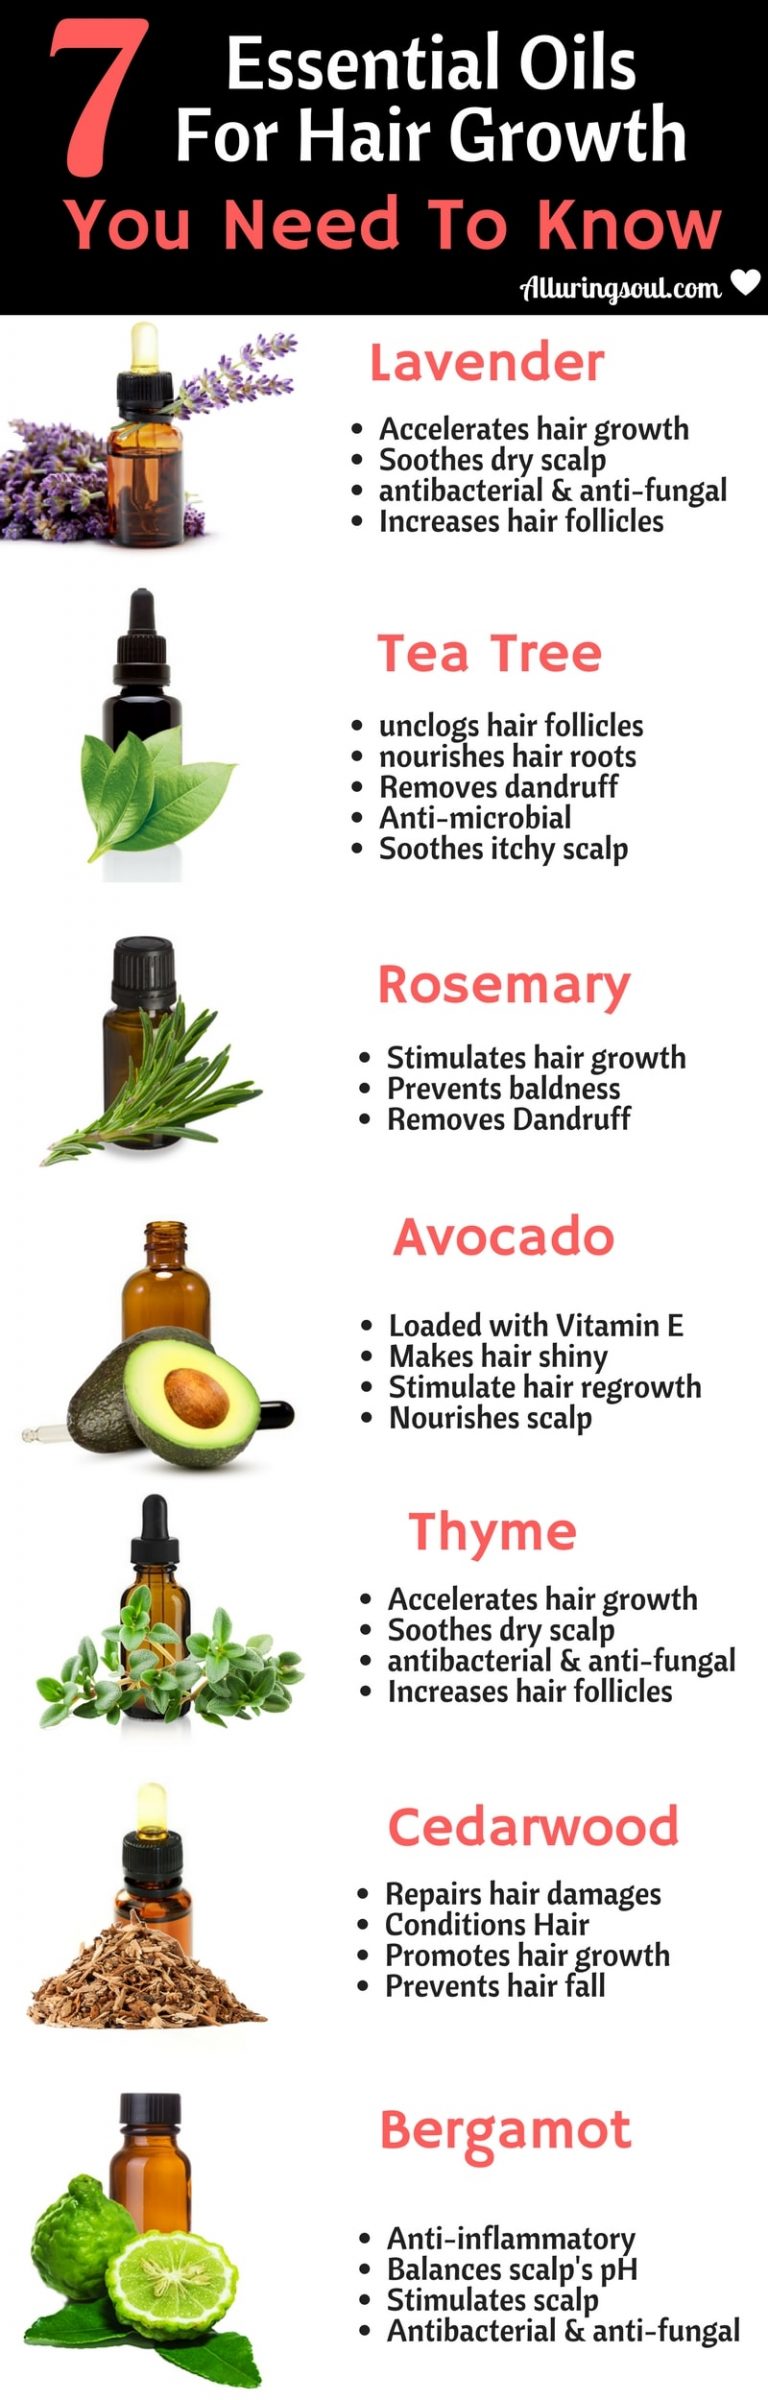 7 Best Essential Oils For Hair Growth You Need To Know 3923